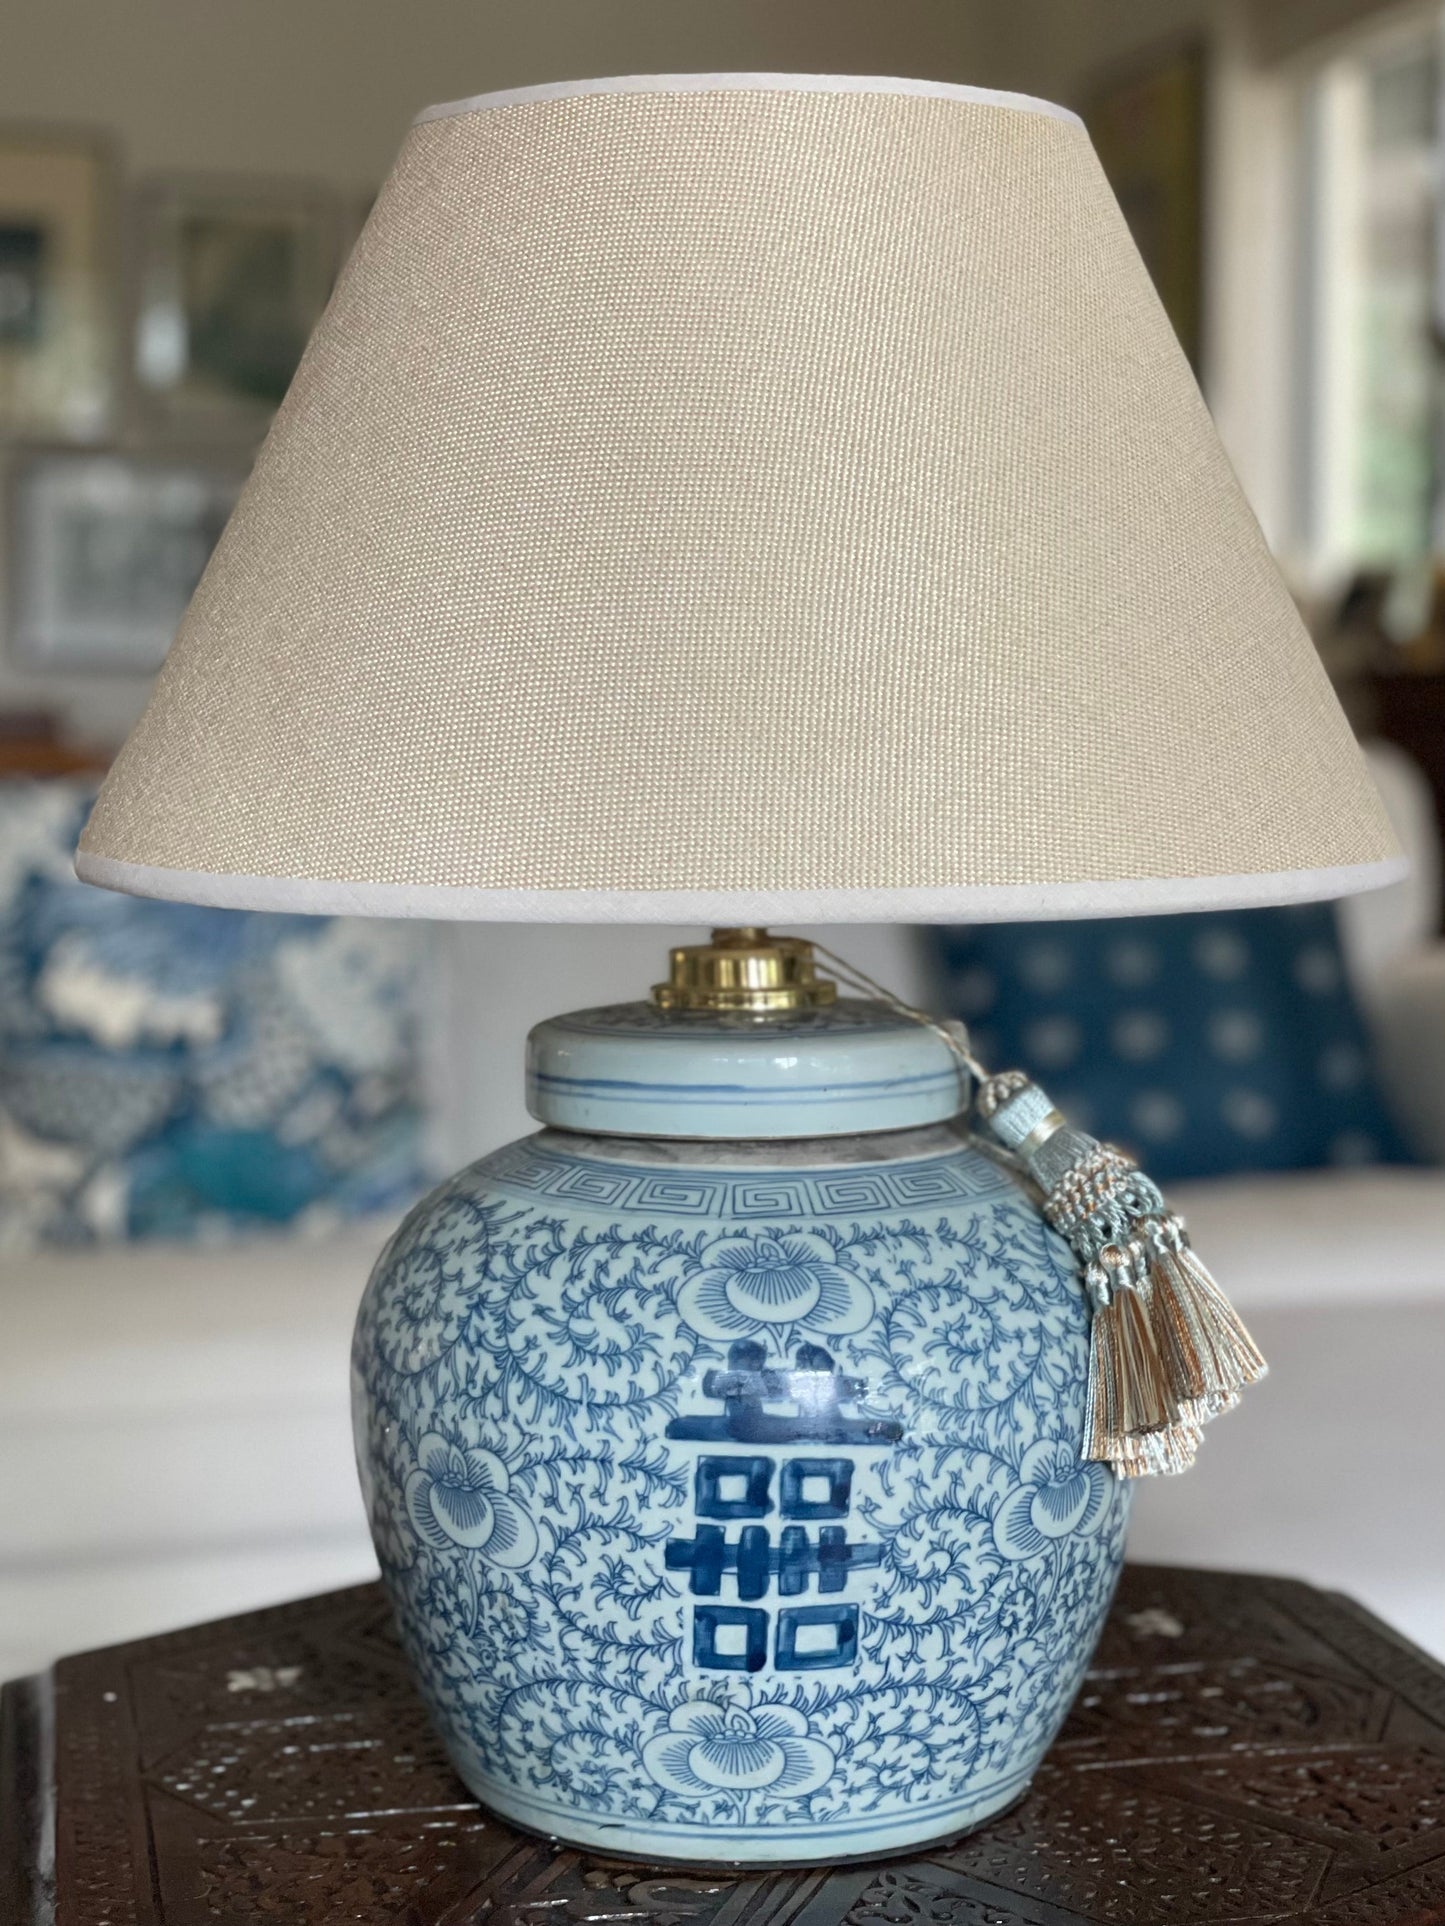 Woven Linen Lamp Shade with double happiness ginger jar lamp base